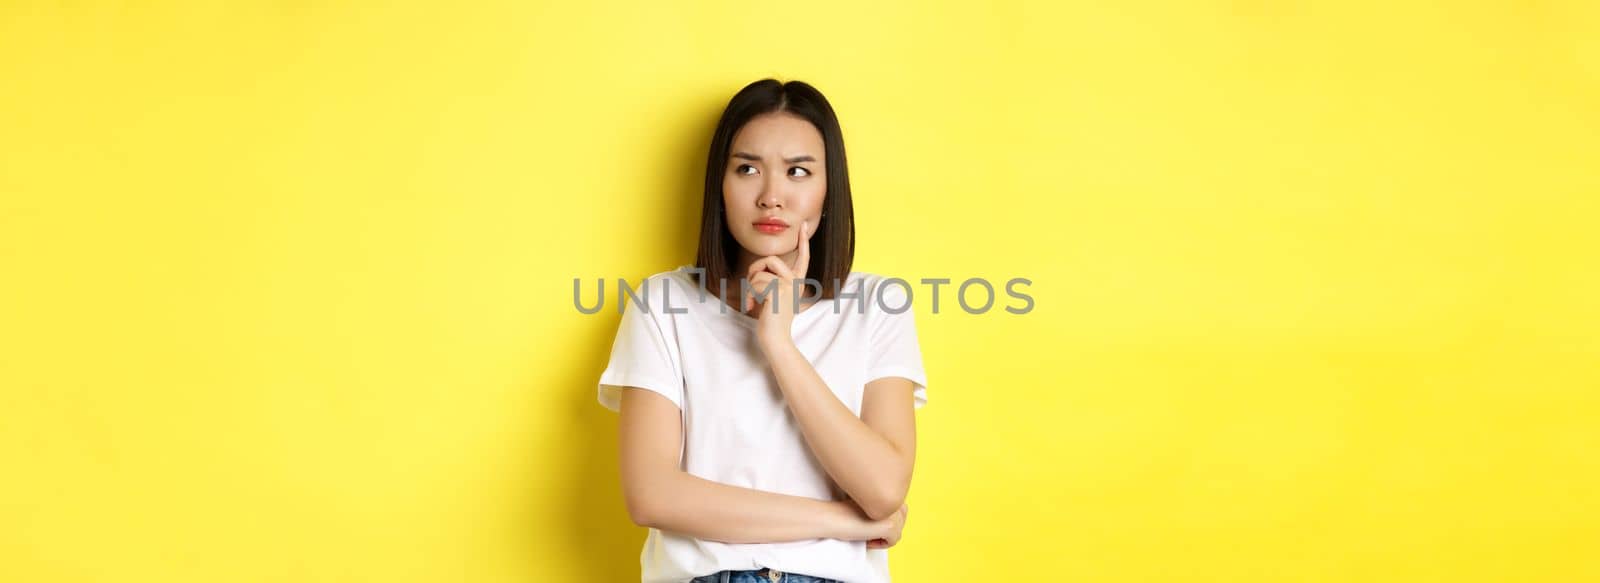 Beauty and fashion concept. Pensive asian woman thinking, looking thoughtful while pondering something, standing over yellow background.